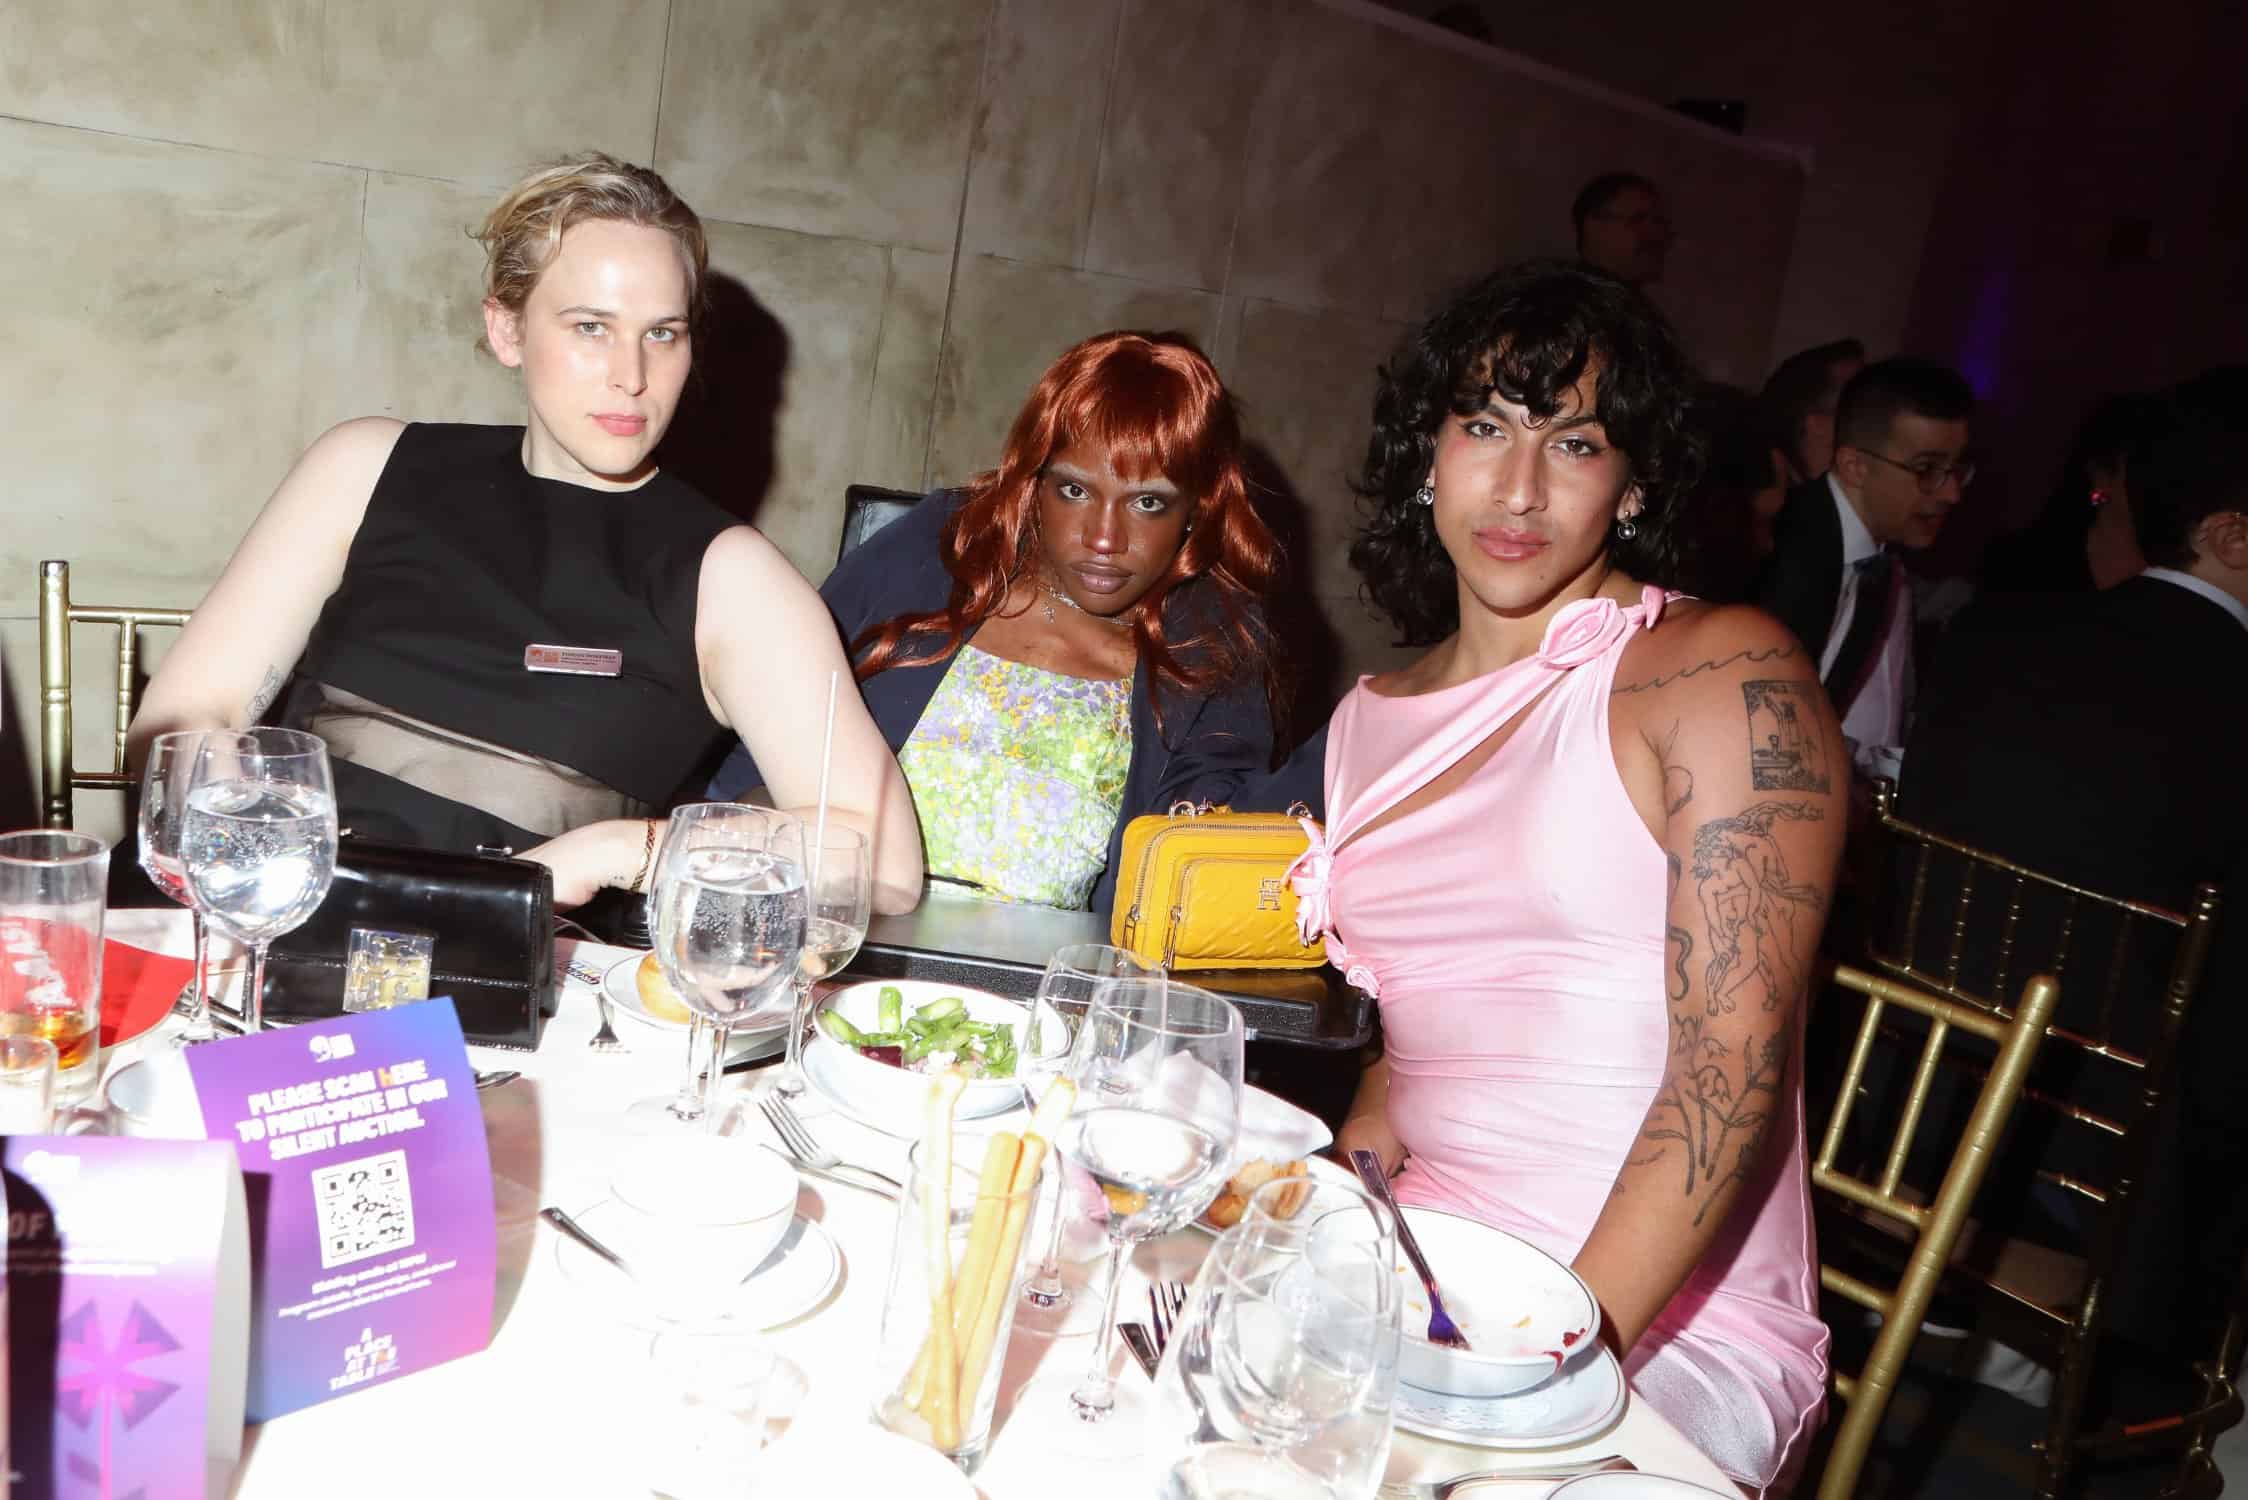 Tommy Dorfman, Aaron Rose Philip, Ali Forney Center, galas, events, A Seat at the Table Gala